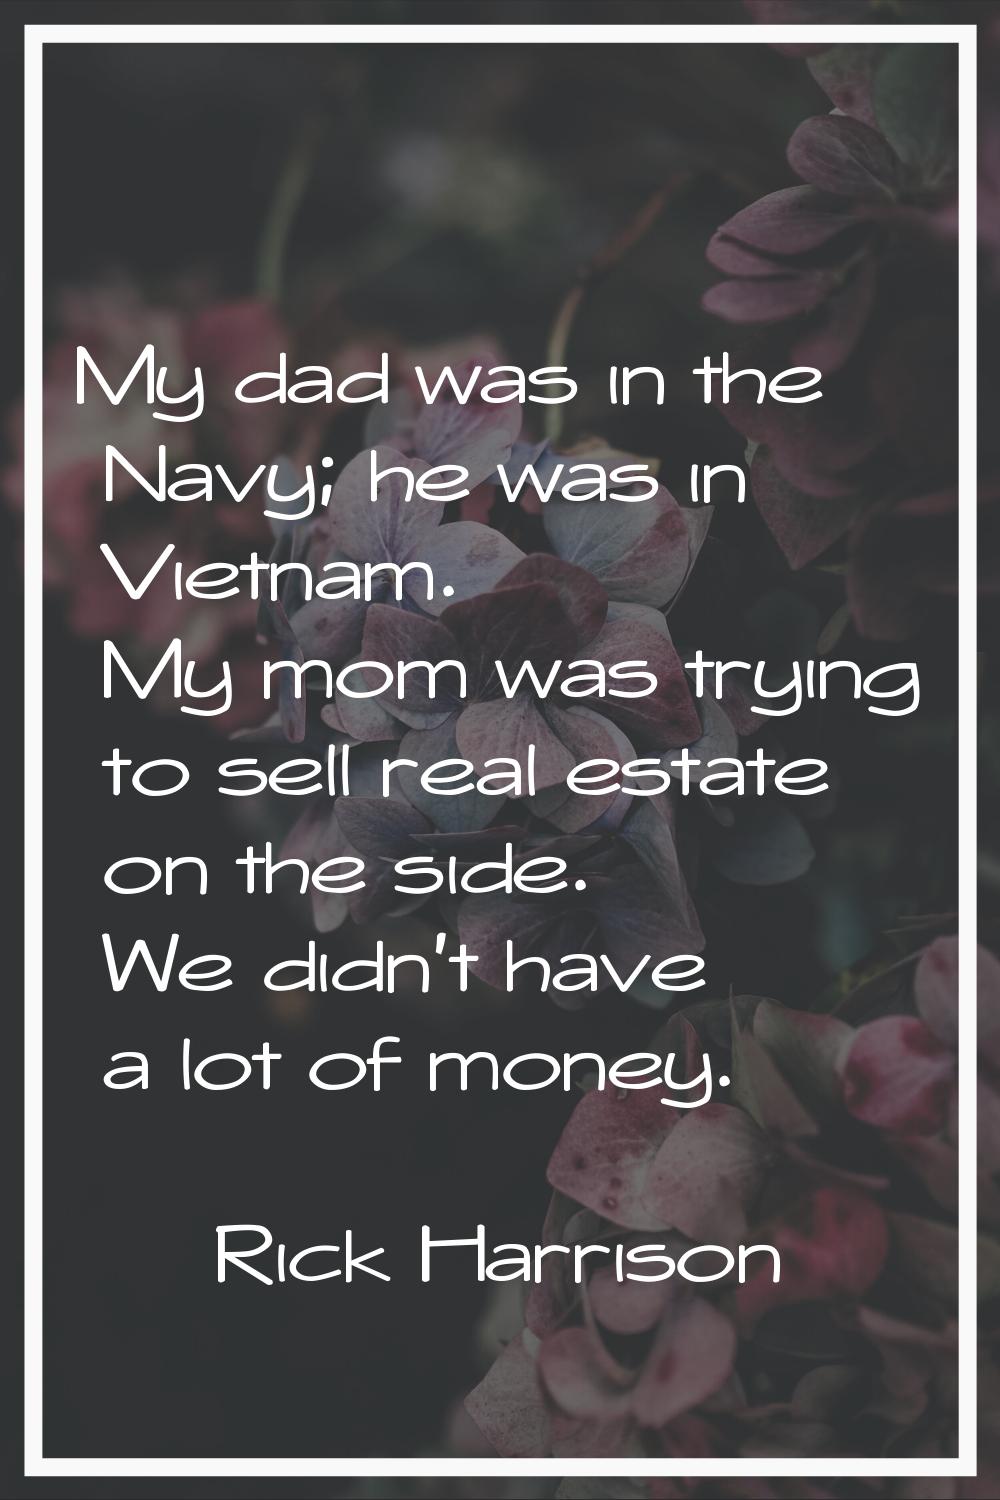 My dad was in the Navy; he was in Vietnam. My mom was trying to sell real estate on the side. We di